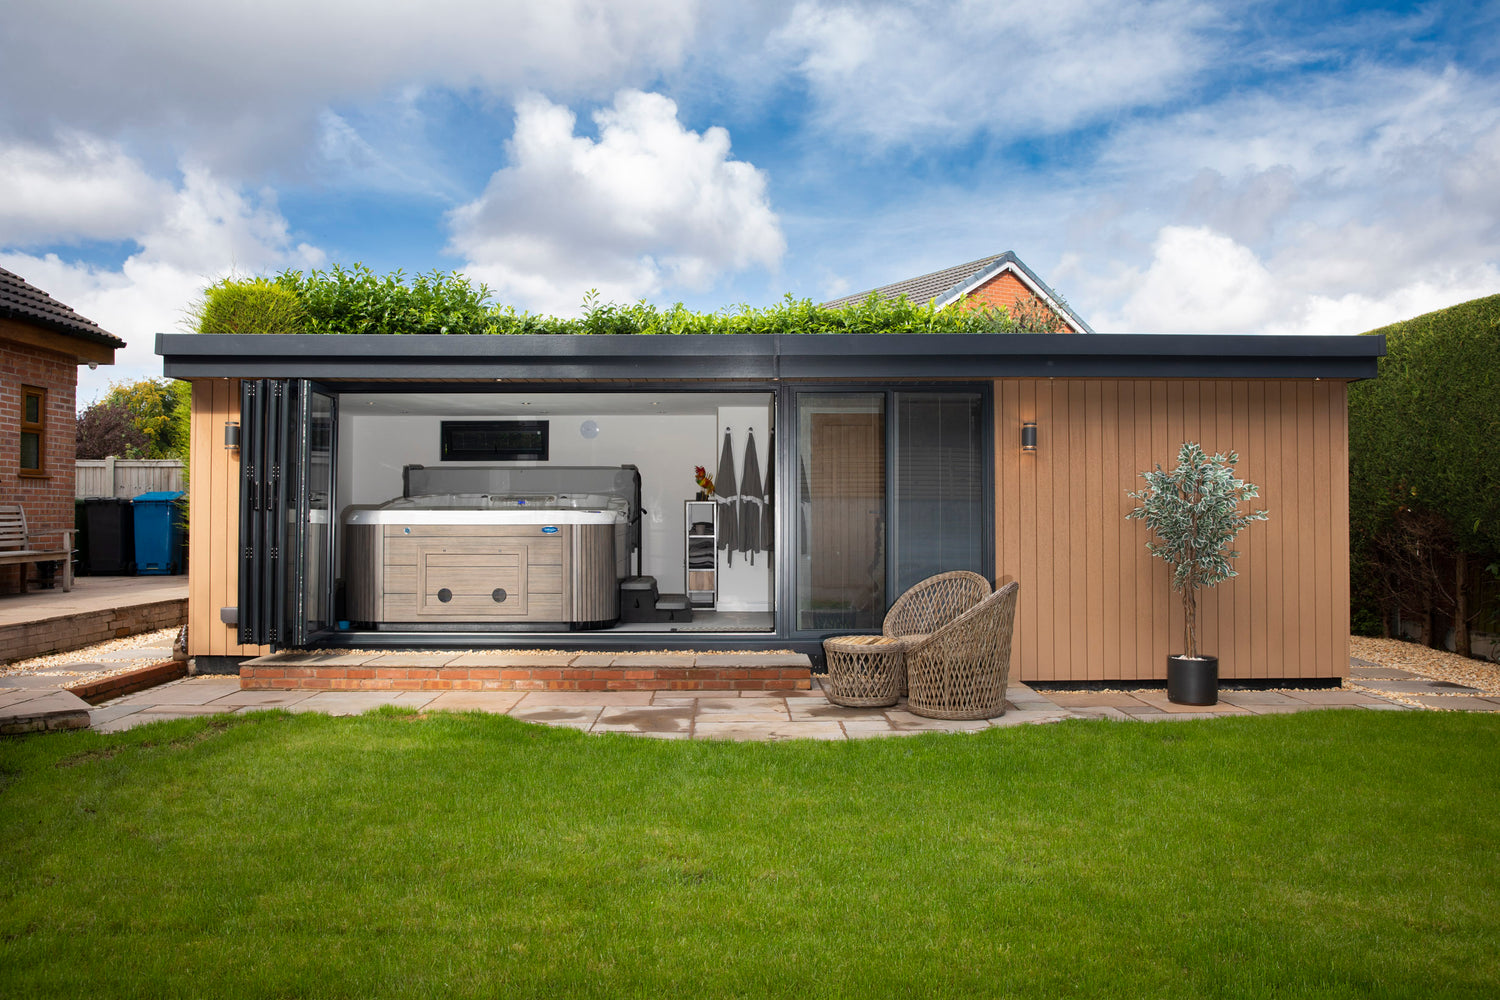 A garden room annexe in Chester, Cheshire with a hot tub and sliding aluminium doors